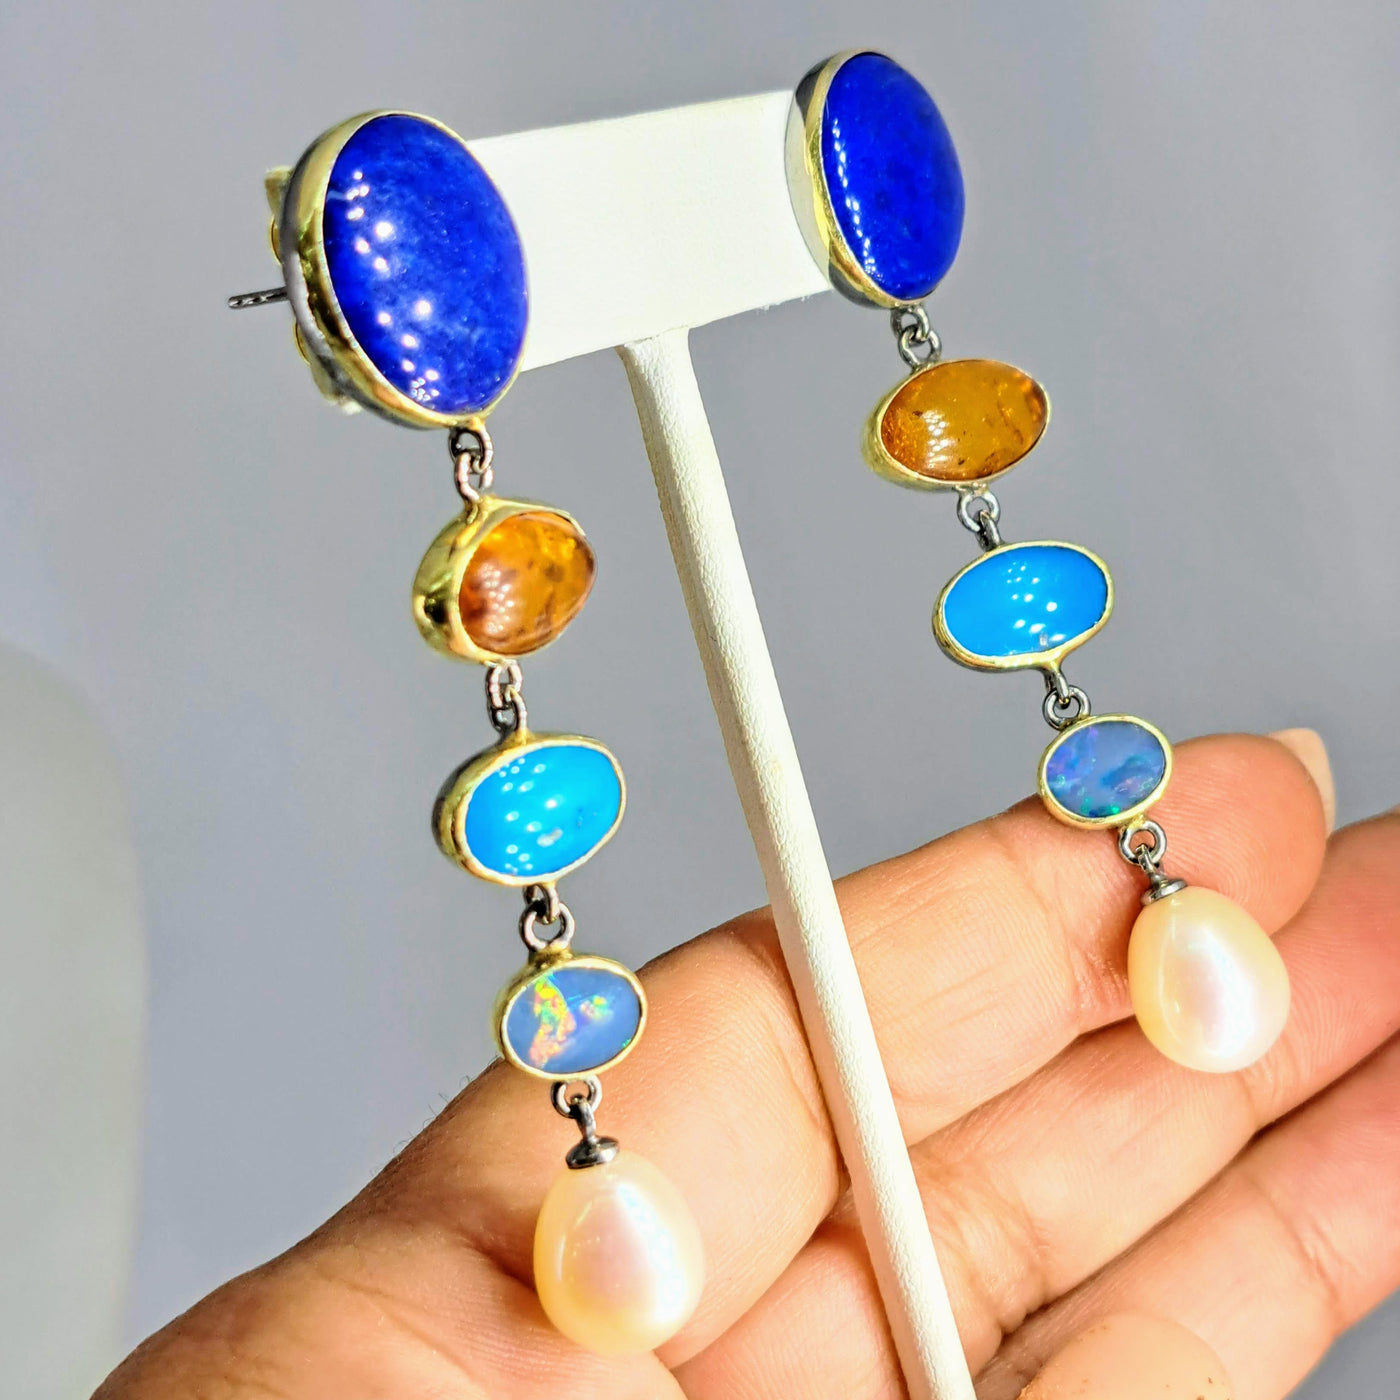 "Sunset" 3" Earrings - Lapis, Amber, Turquoise, Opal, Pearl, Gold Sterling